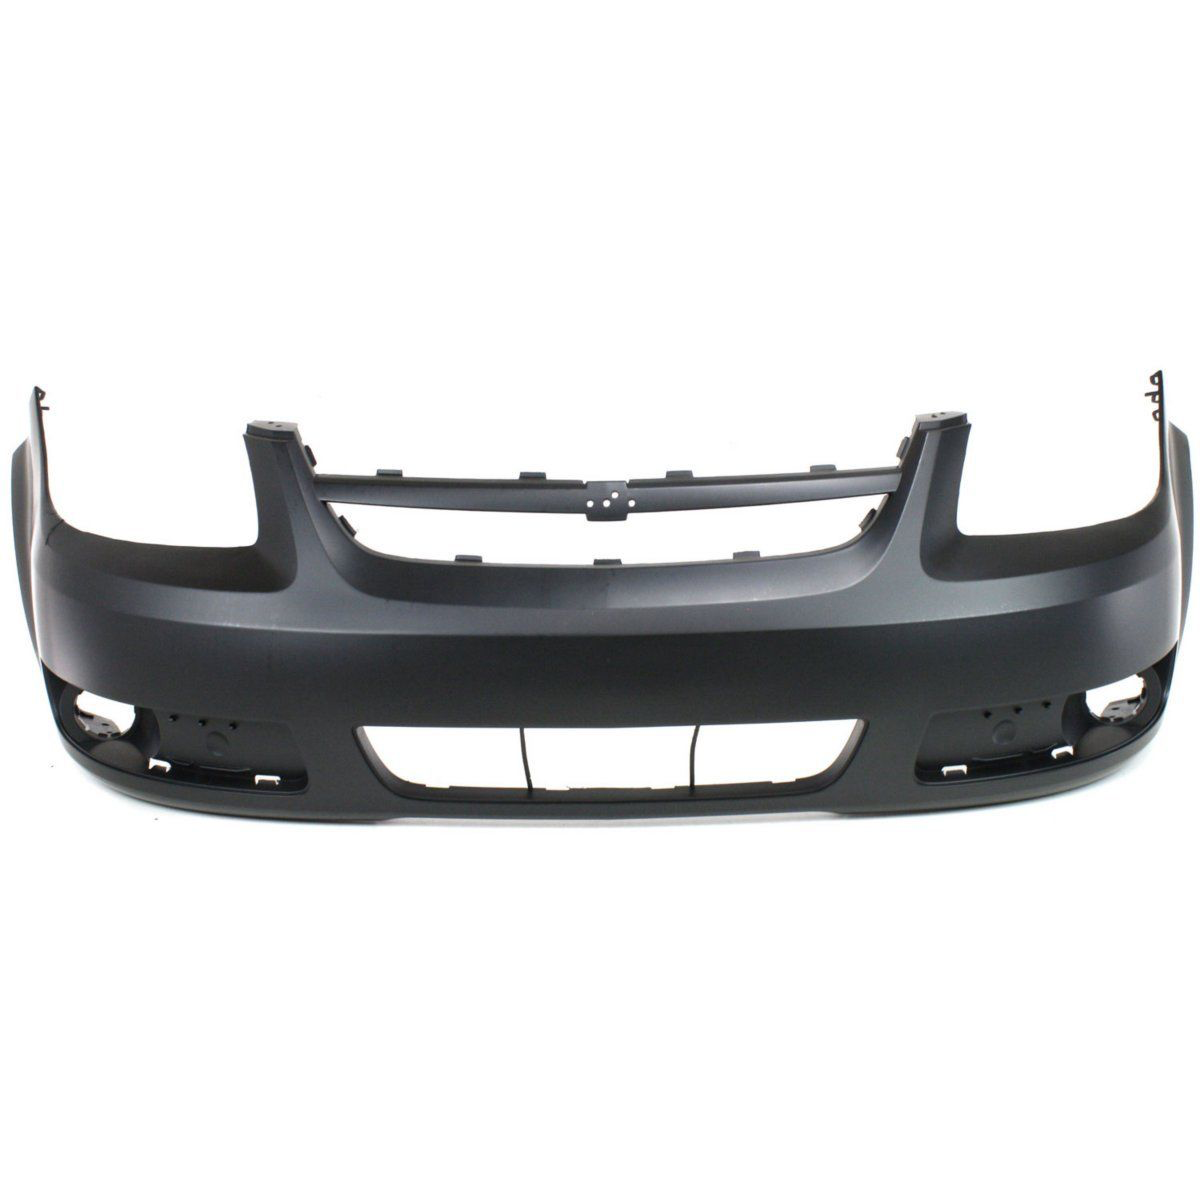 2005-2008 CHEVY COBALT Front Bumper Cover LT  w/Fog Lamps  w/o Luxury Pkg Painted to Match